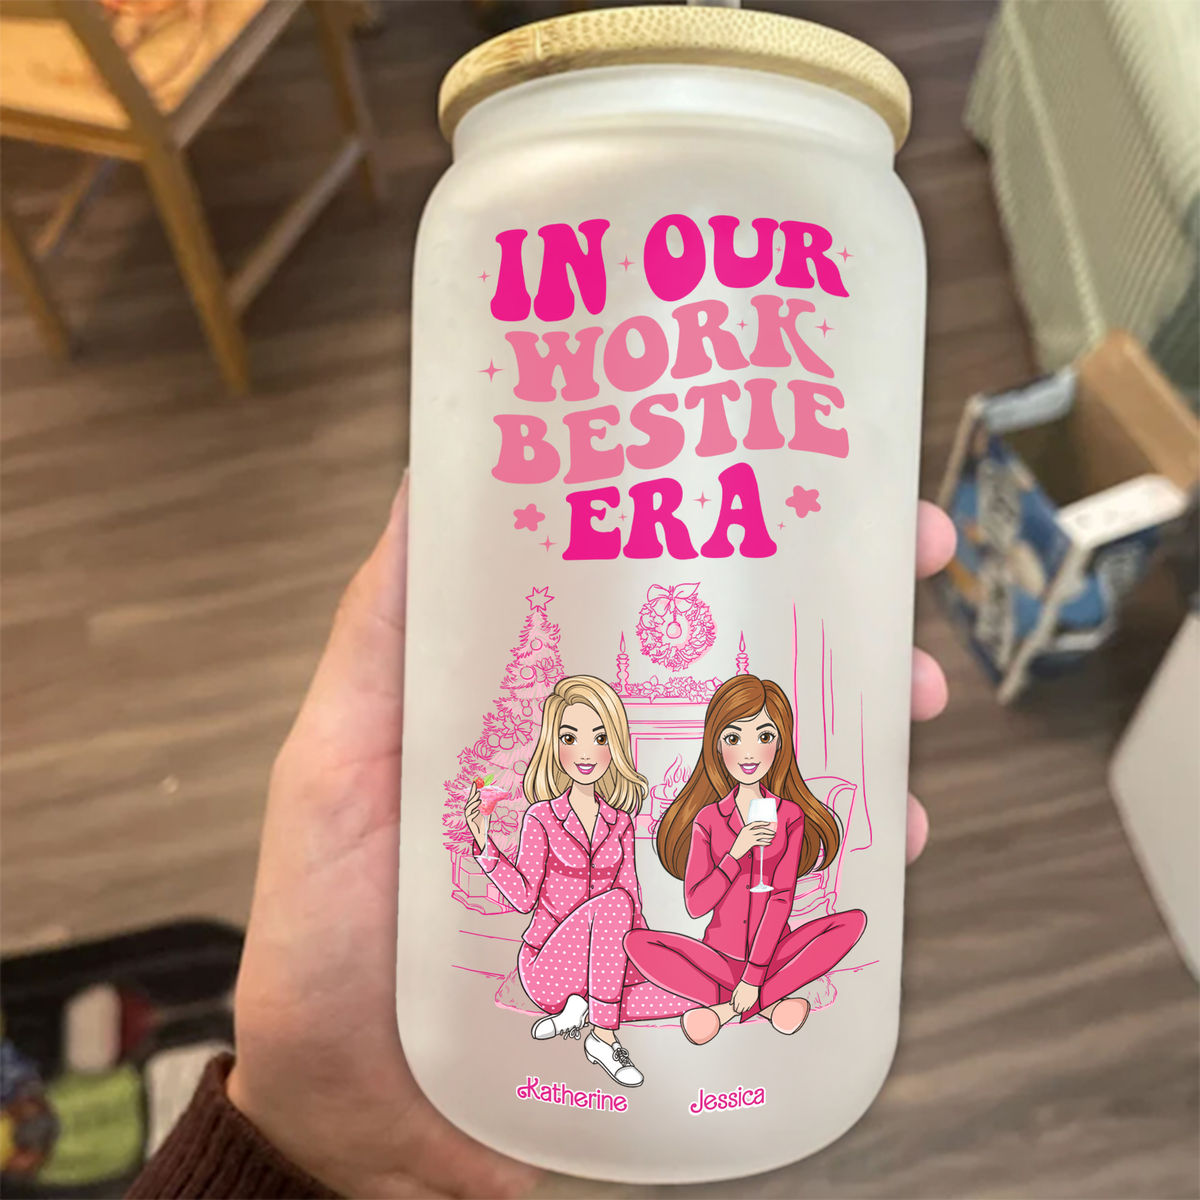 Christmas Gifts For Her - The Best Glass Tumbler Ever - Pink Dolls - In Our  Work Bestie Era - Gift For Best Friends, BFF, Sisters, Coworkers